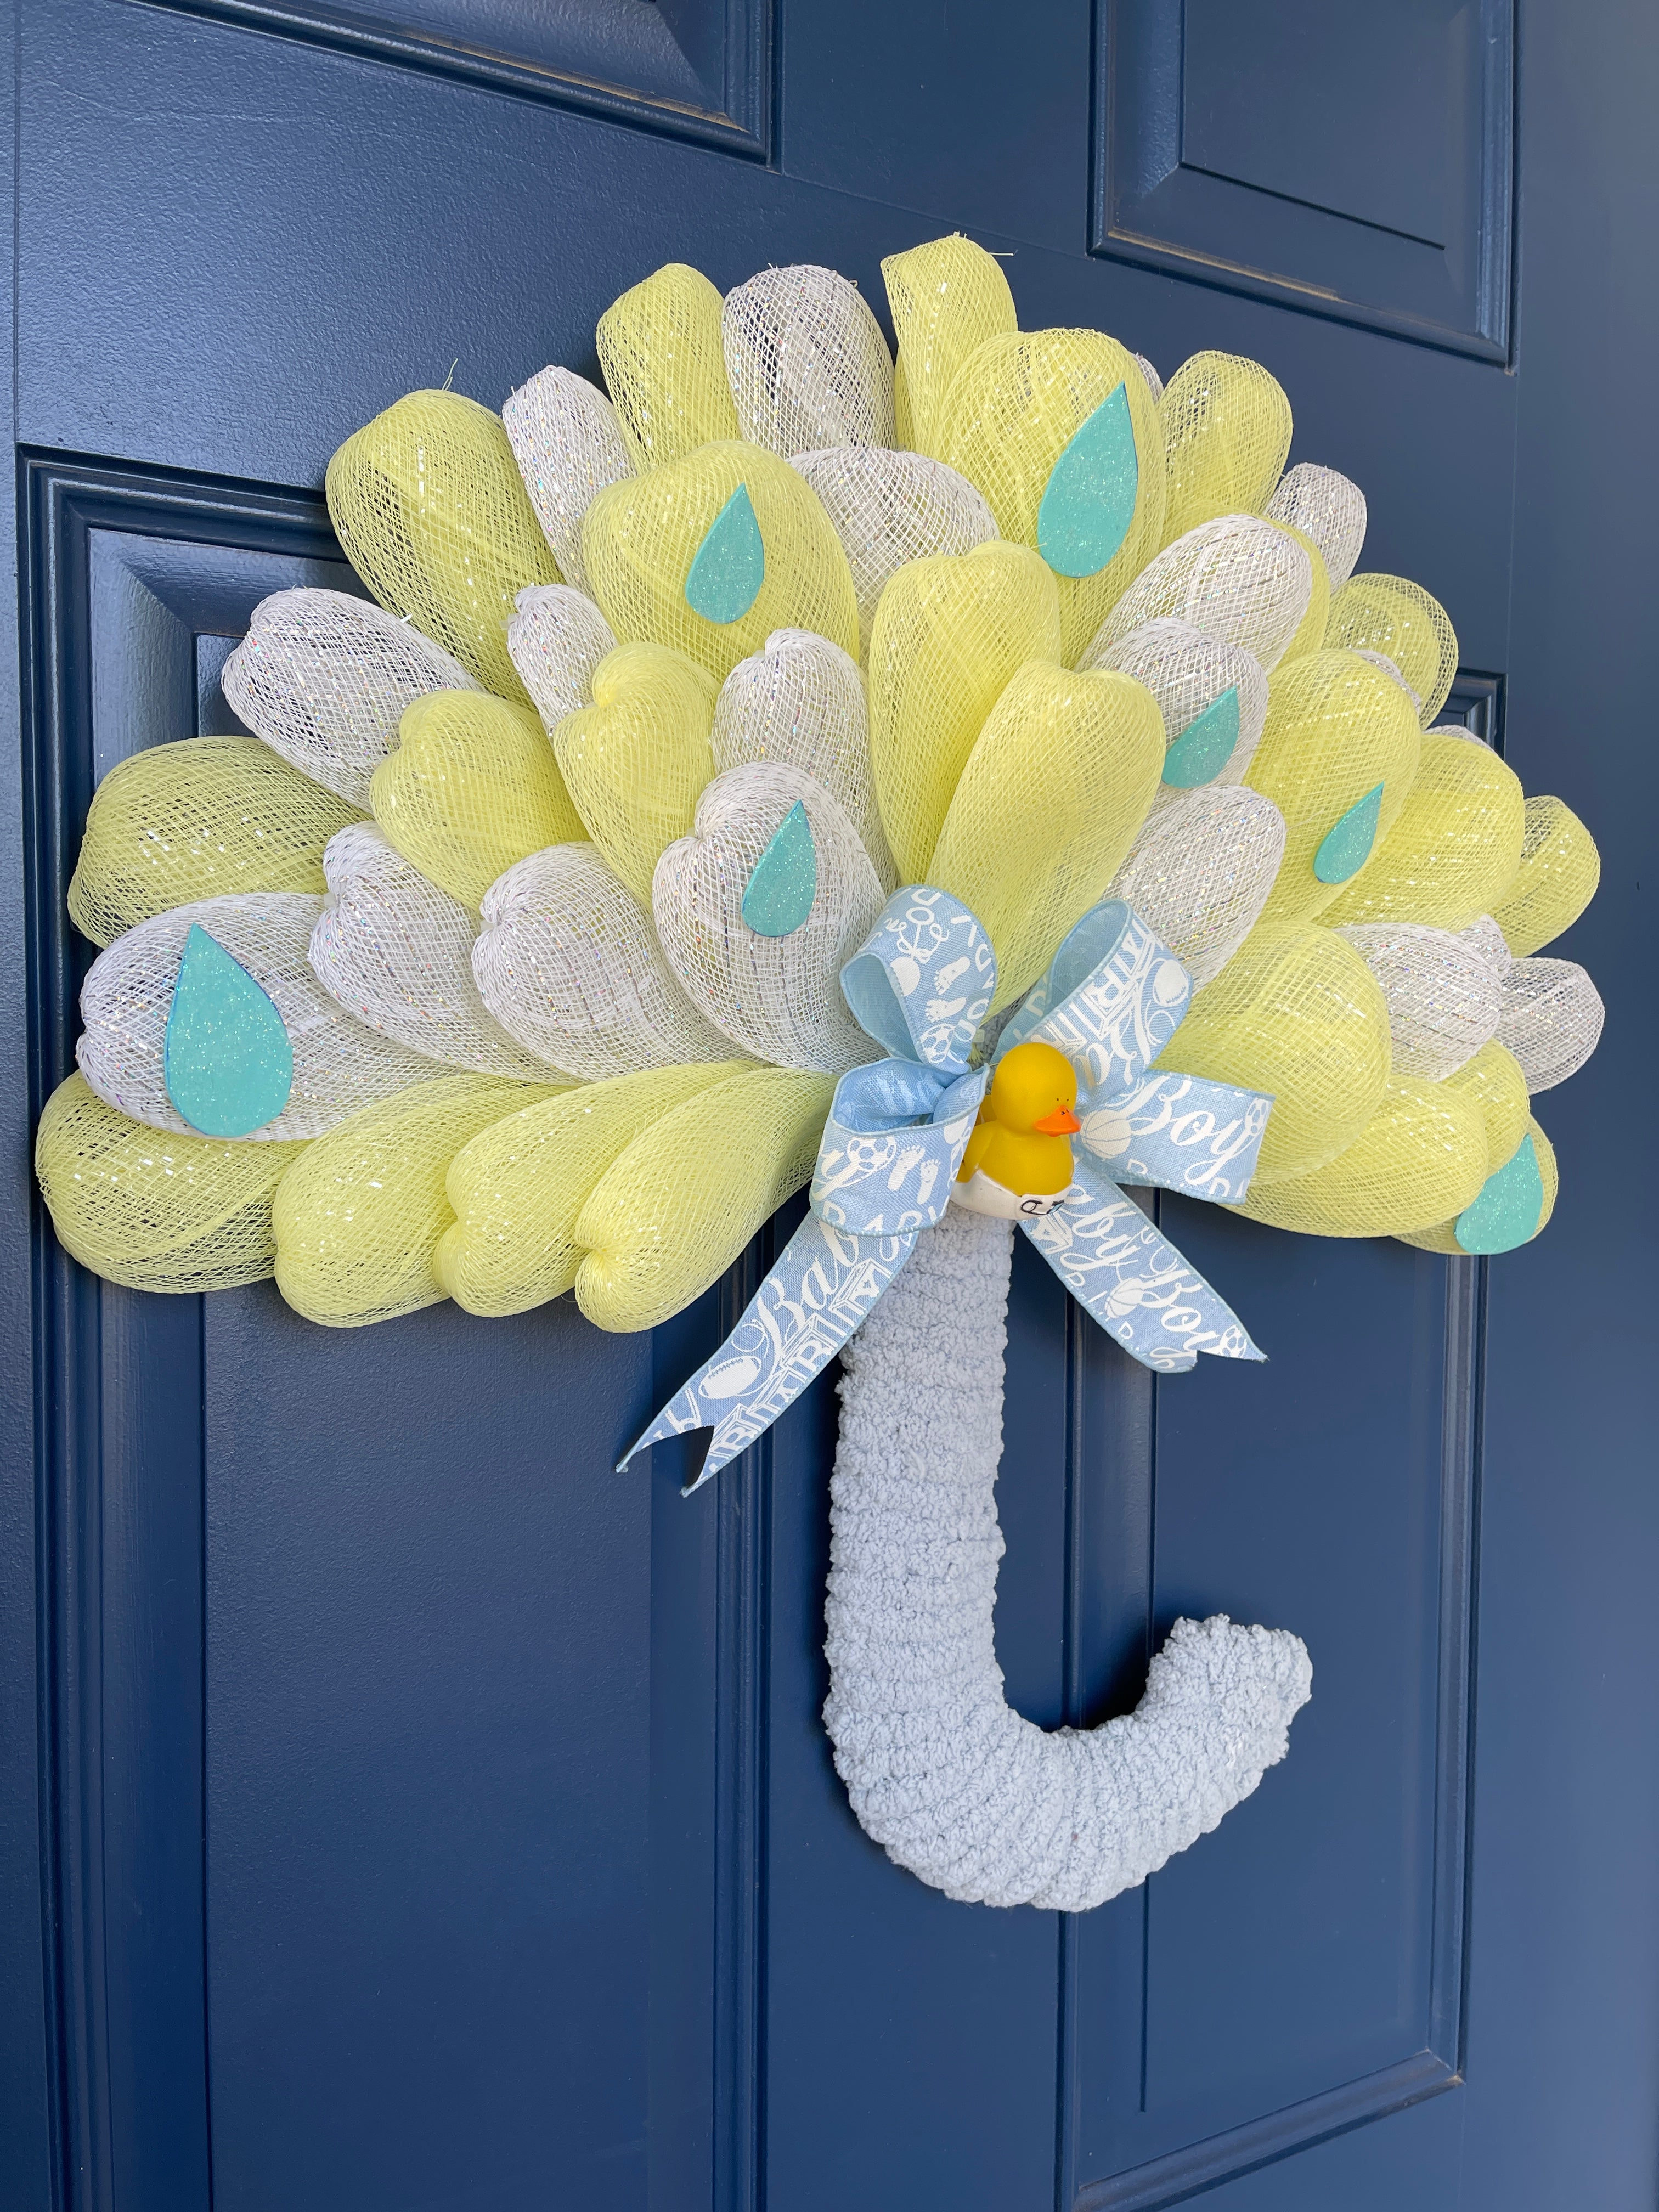 Side View of Blue, White and Yellow Deco Mesh Umbrella Wreath for Baby Boy Shower